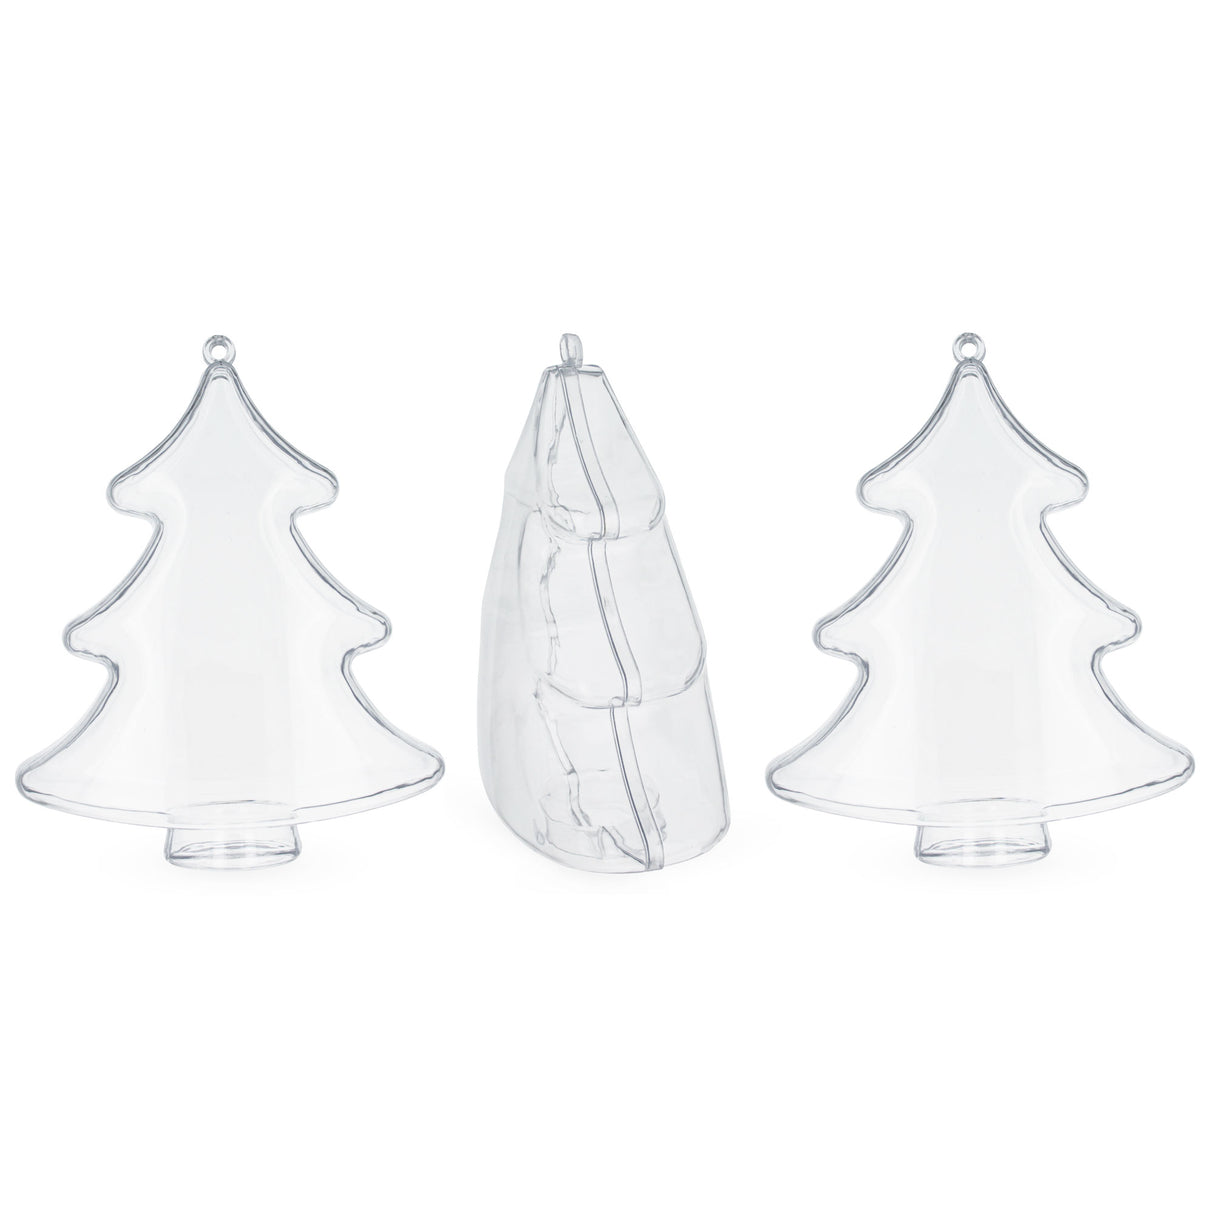 Plastic Set of 3 Clear Plastic Christmas Tree Ornaments 4.35 Inches (110.5 mm) in Clear color Triangle